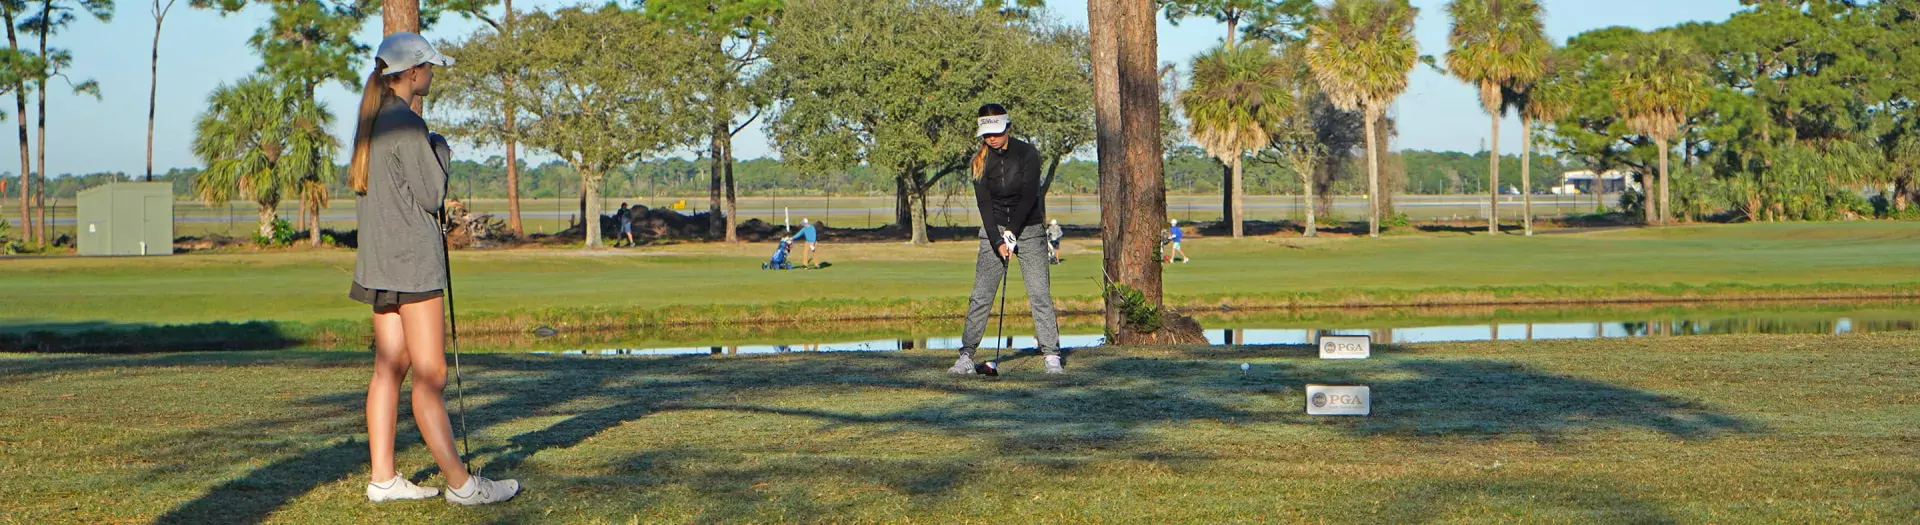 Image of two golfers on the Sailfish 18 Course at Sailfish Sands Golf Course